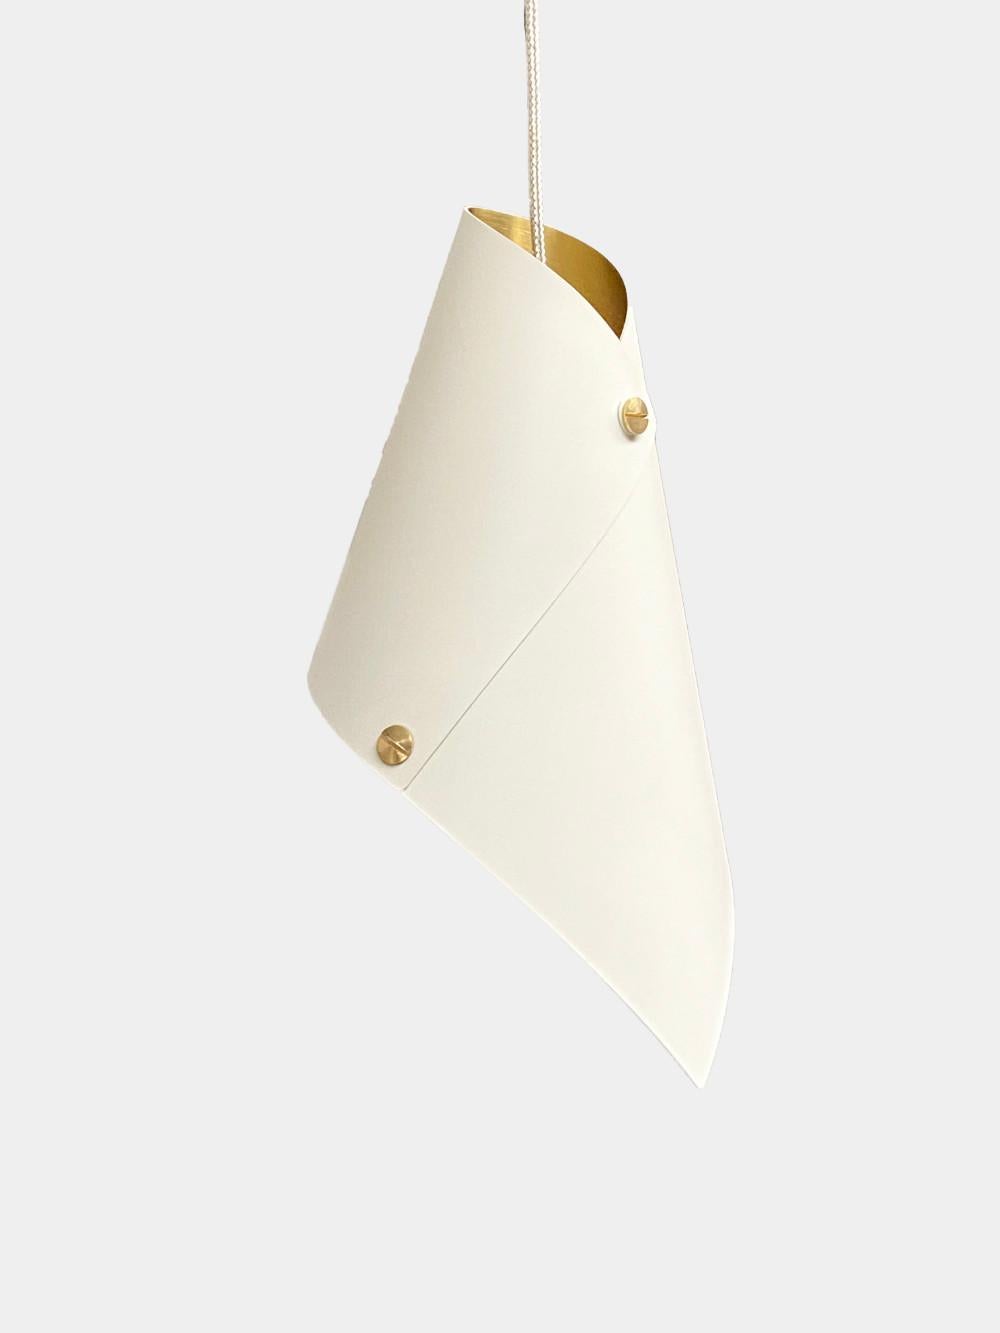 ARC 7 Modern Pendant Light in White and Brushed Brass Made in Britain In New Condition For Sale In London, GB